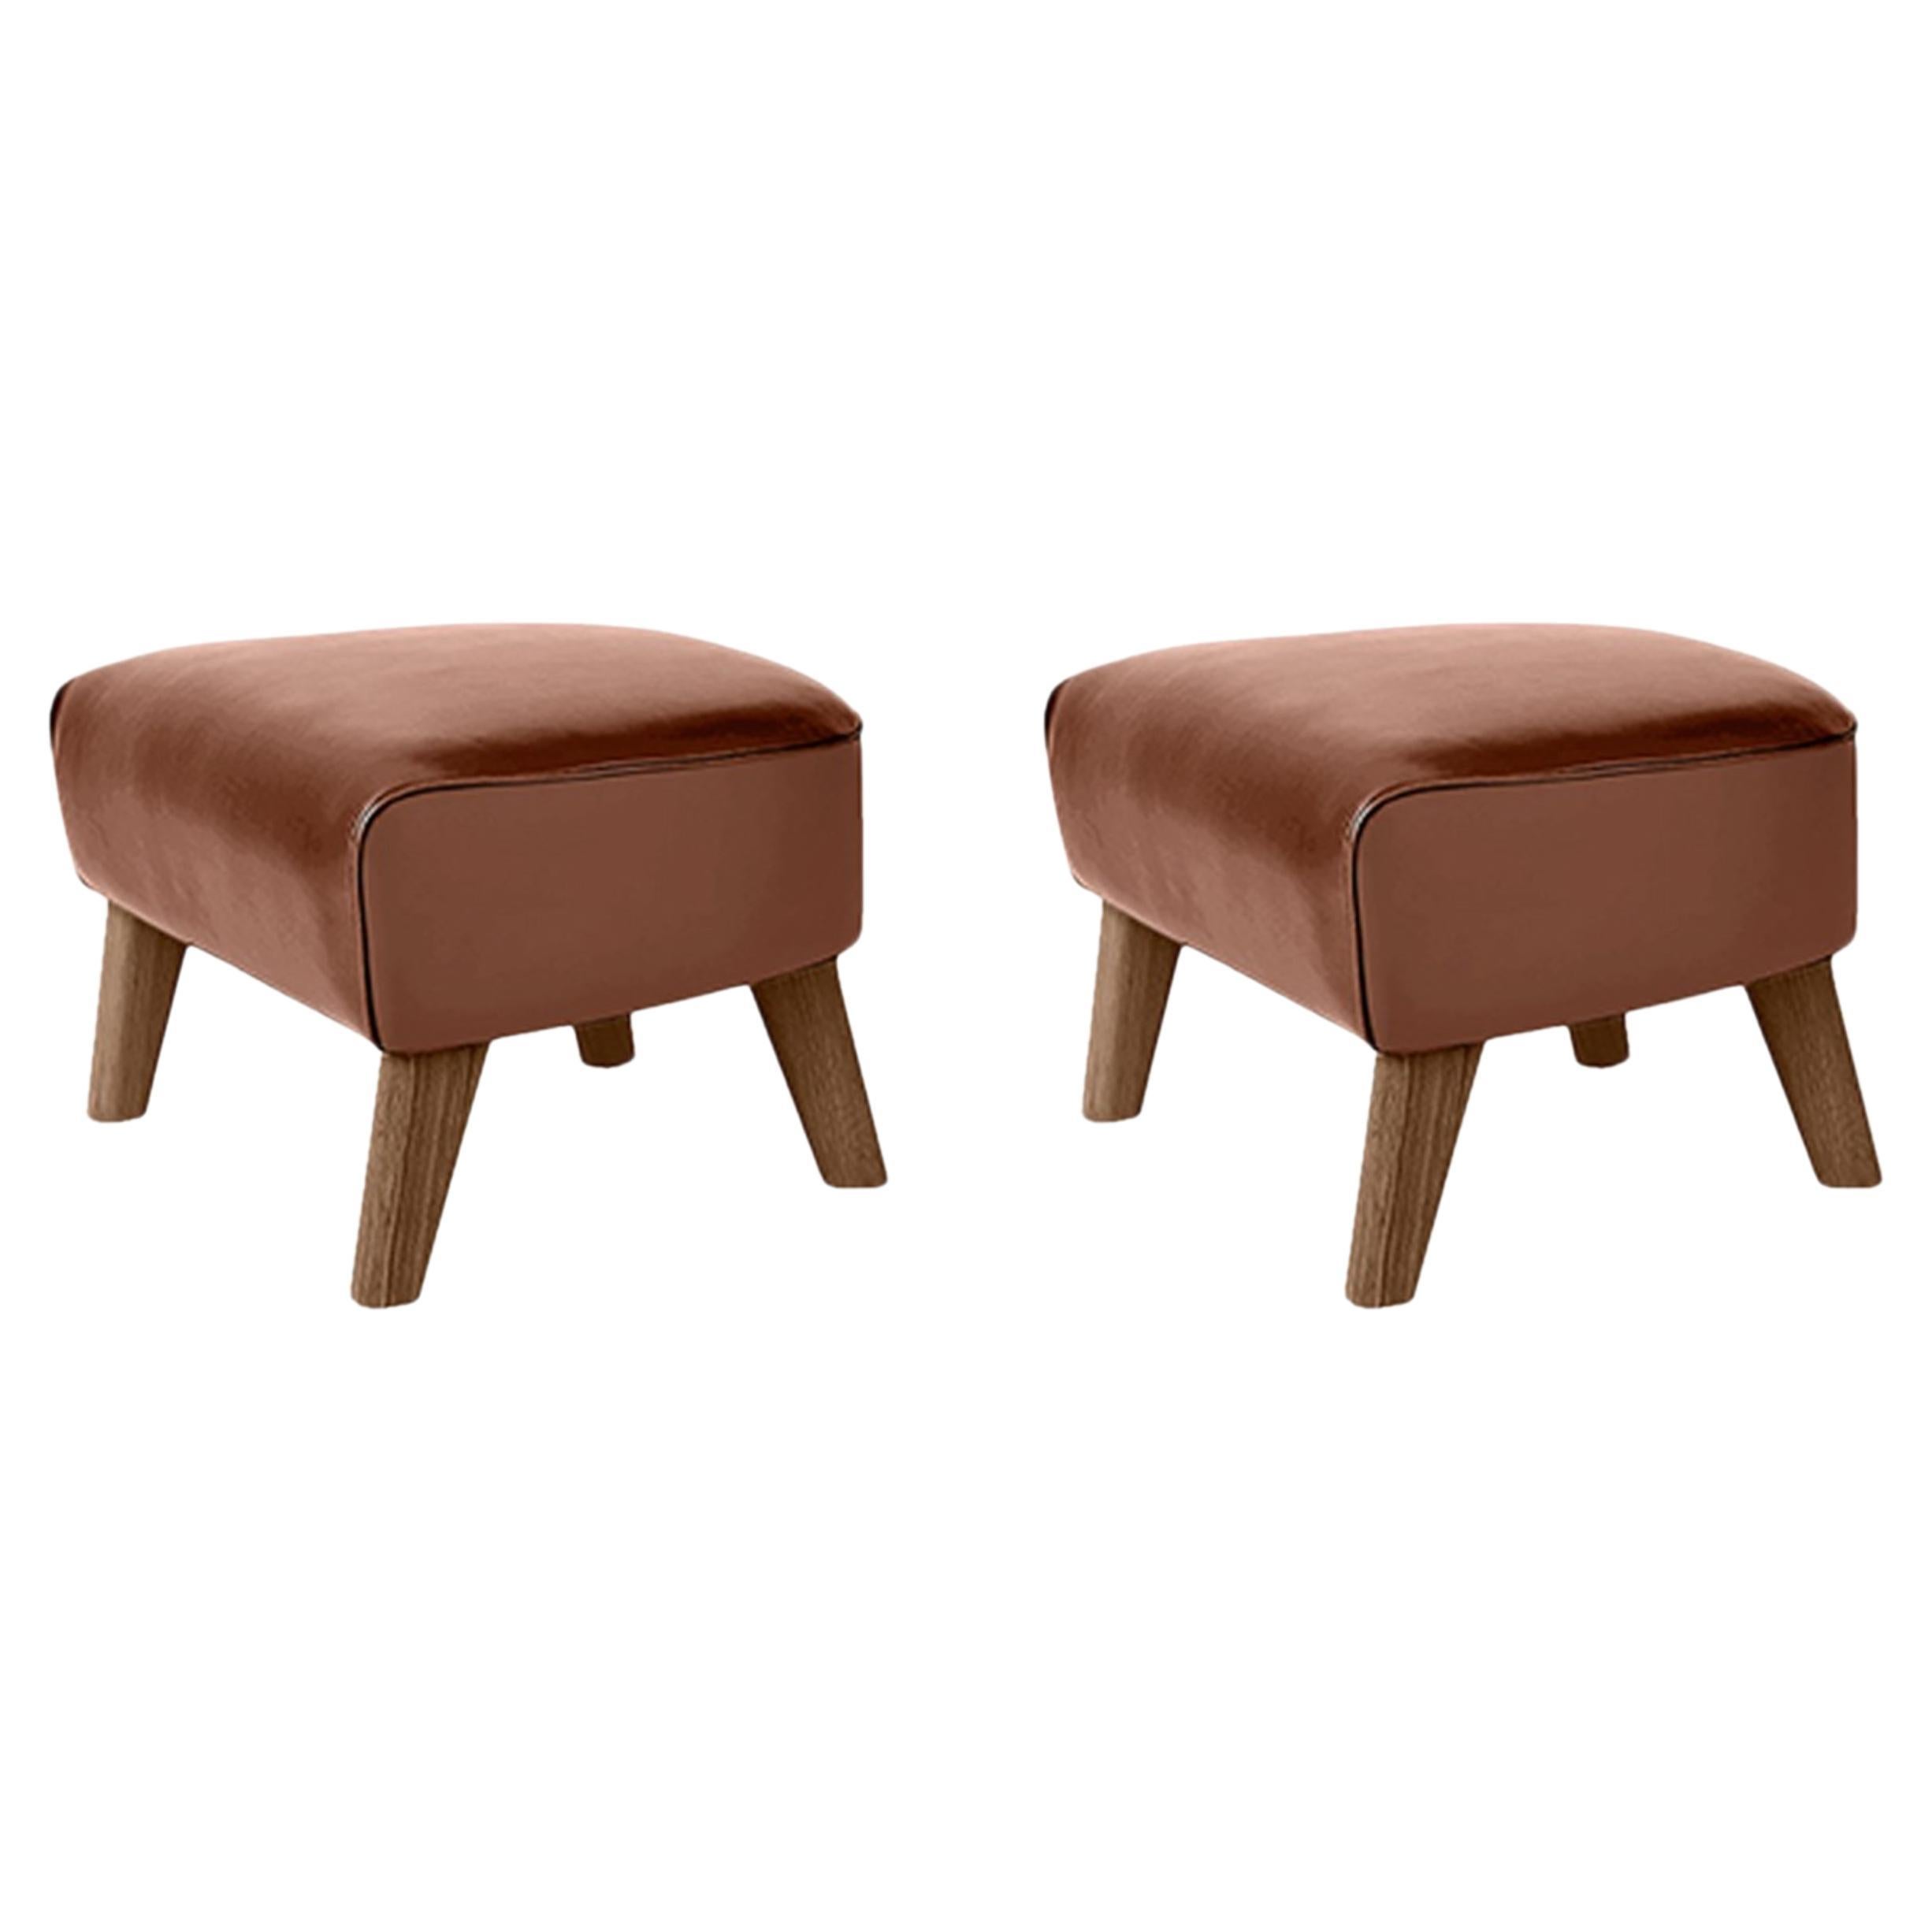 Set of 2 Brown Leather and Smoked Oak My Own Chair Footstools by Lassen For Sale